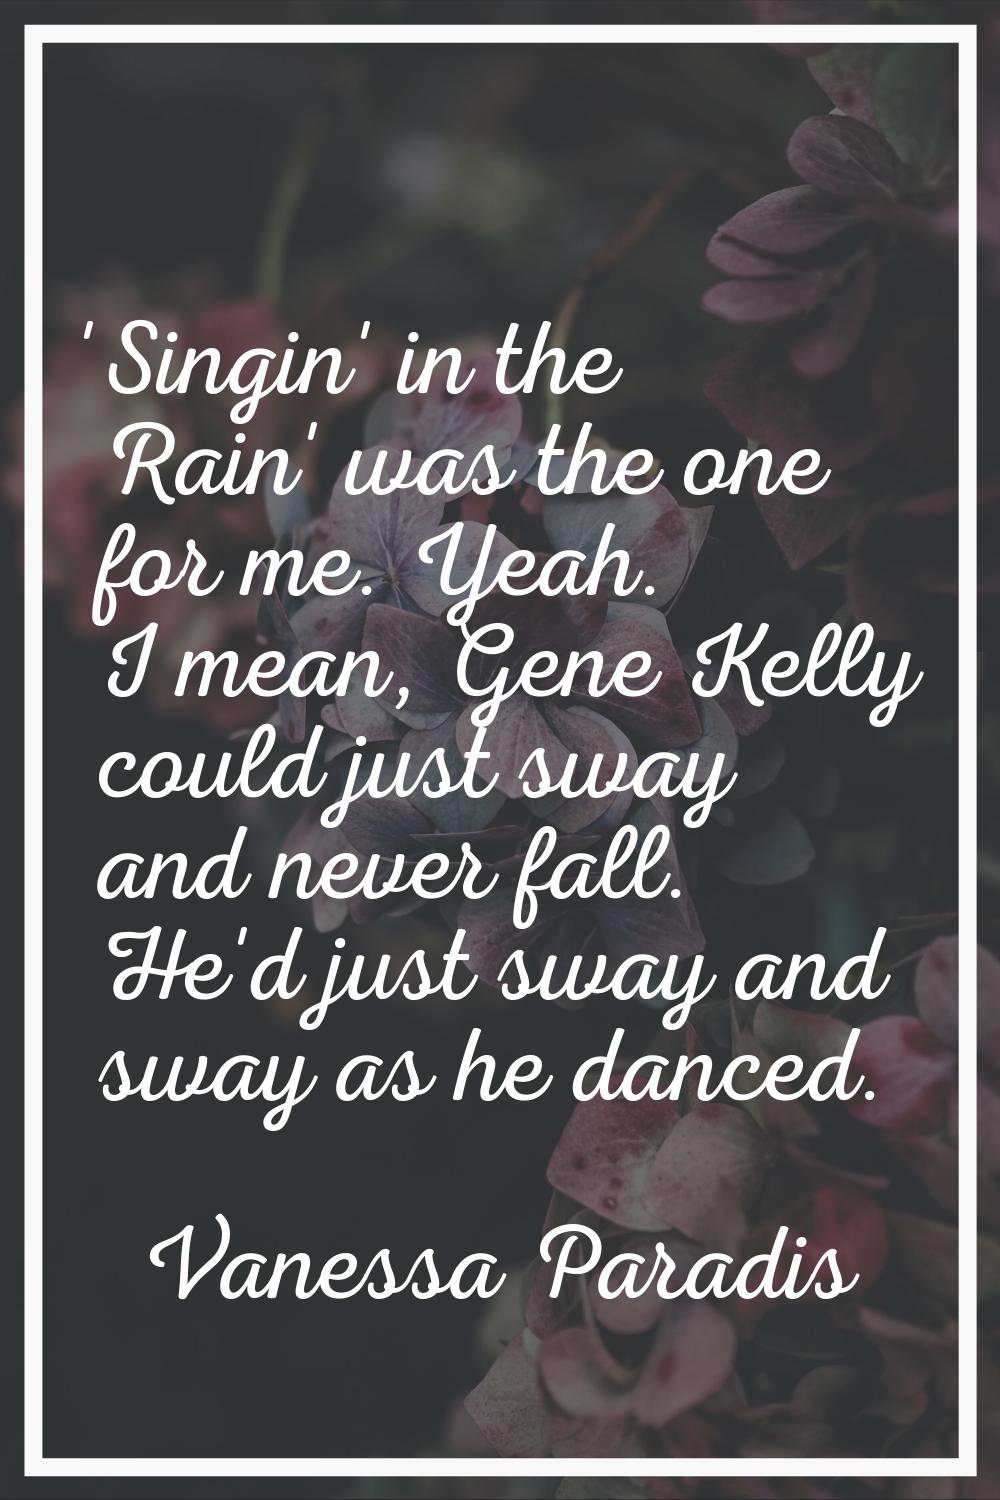 'Singin' in the Rain' was the one for me. Yeah. I mean, Gene Kelly could just sway and never fall. 